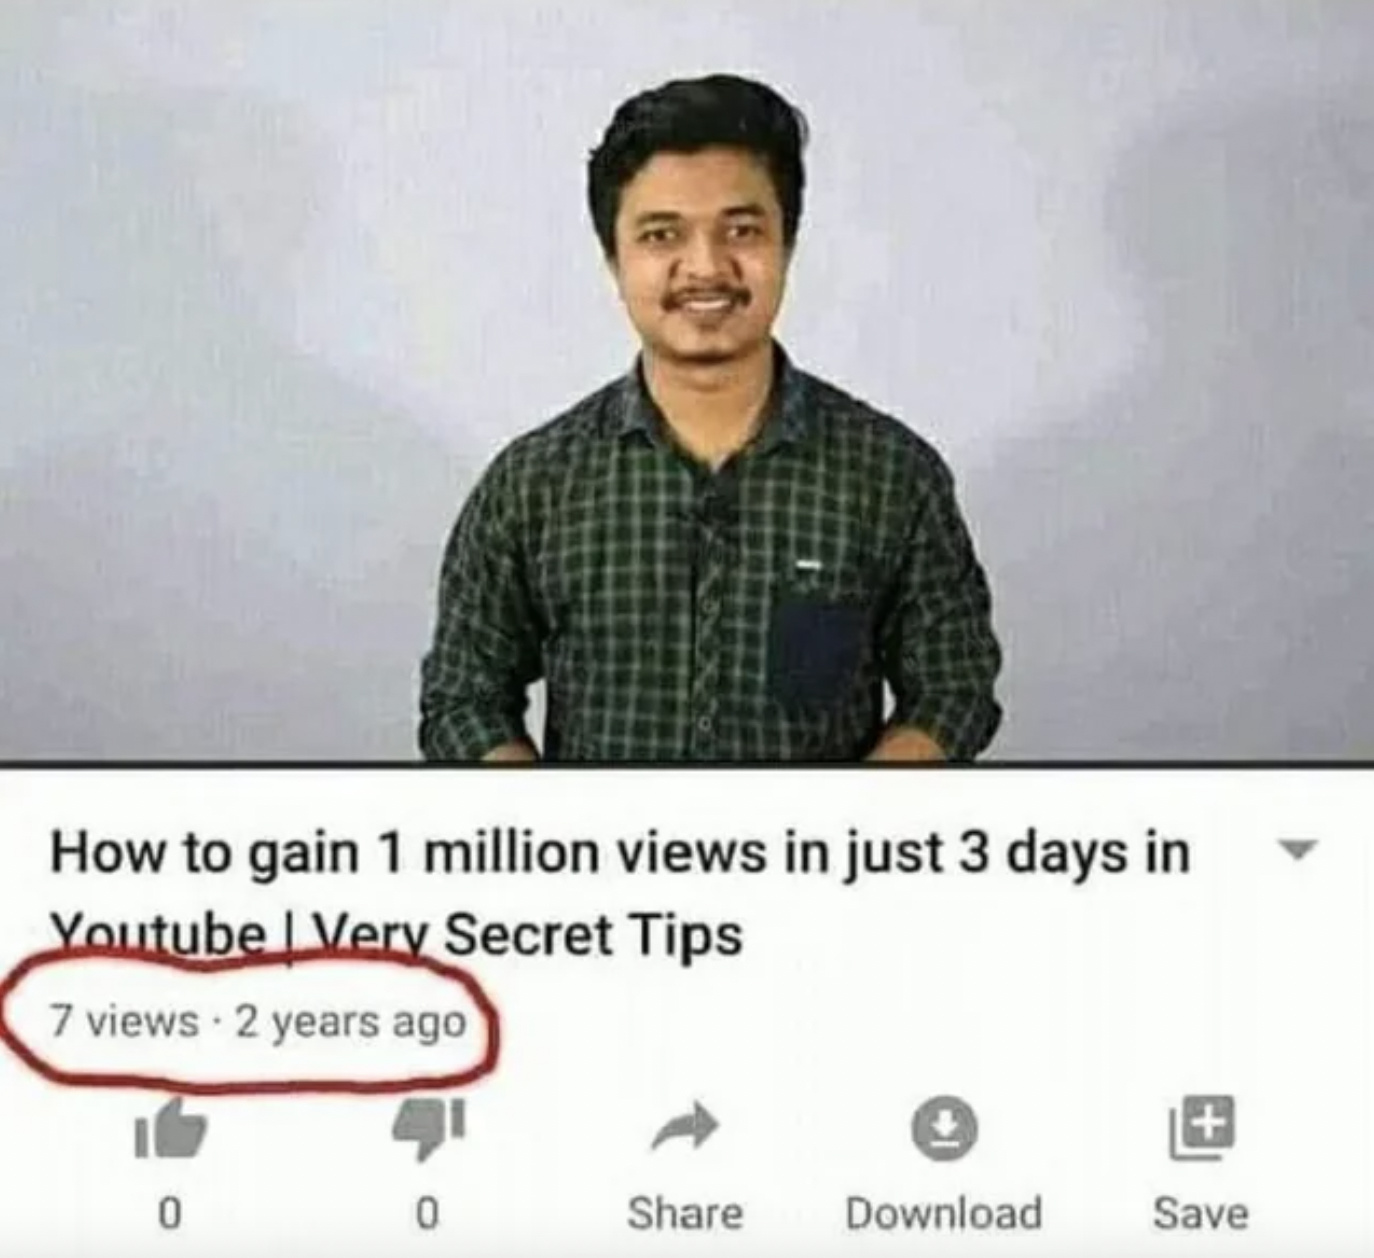 facepalms - smile - How to gain 1 million views in just 3 days in Youtube | Very Secret Tips 7 views 2 years ago 0 0 Download Save